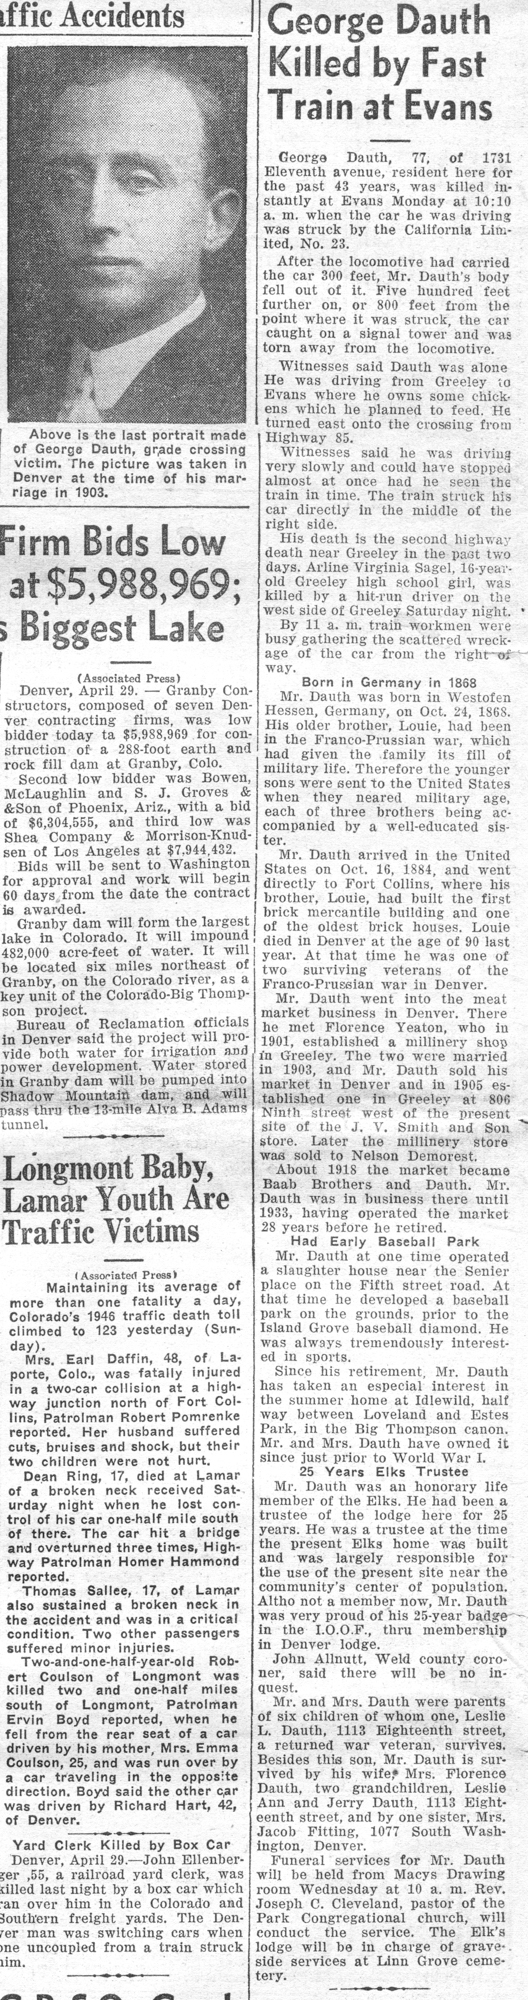 Dauth Family Archive - 1946-04-29 - Weekly Tribune - George Dauth's Obituary